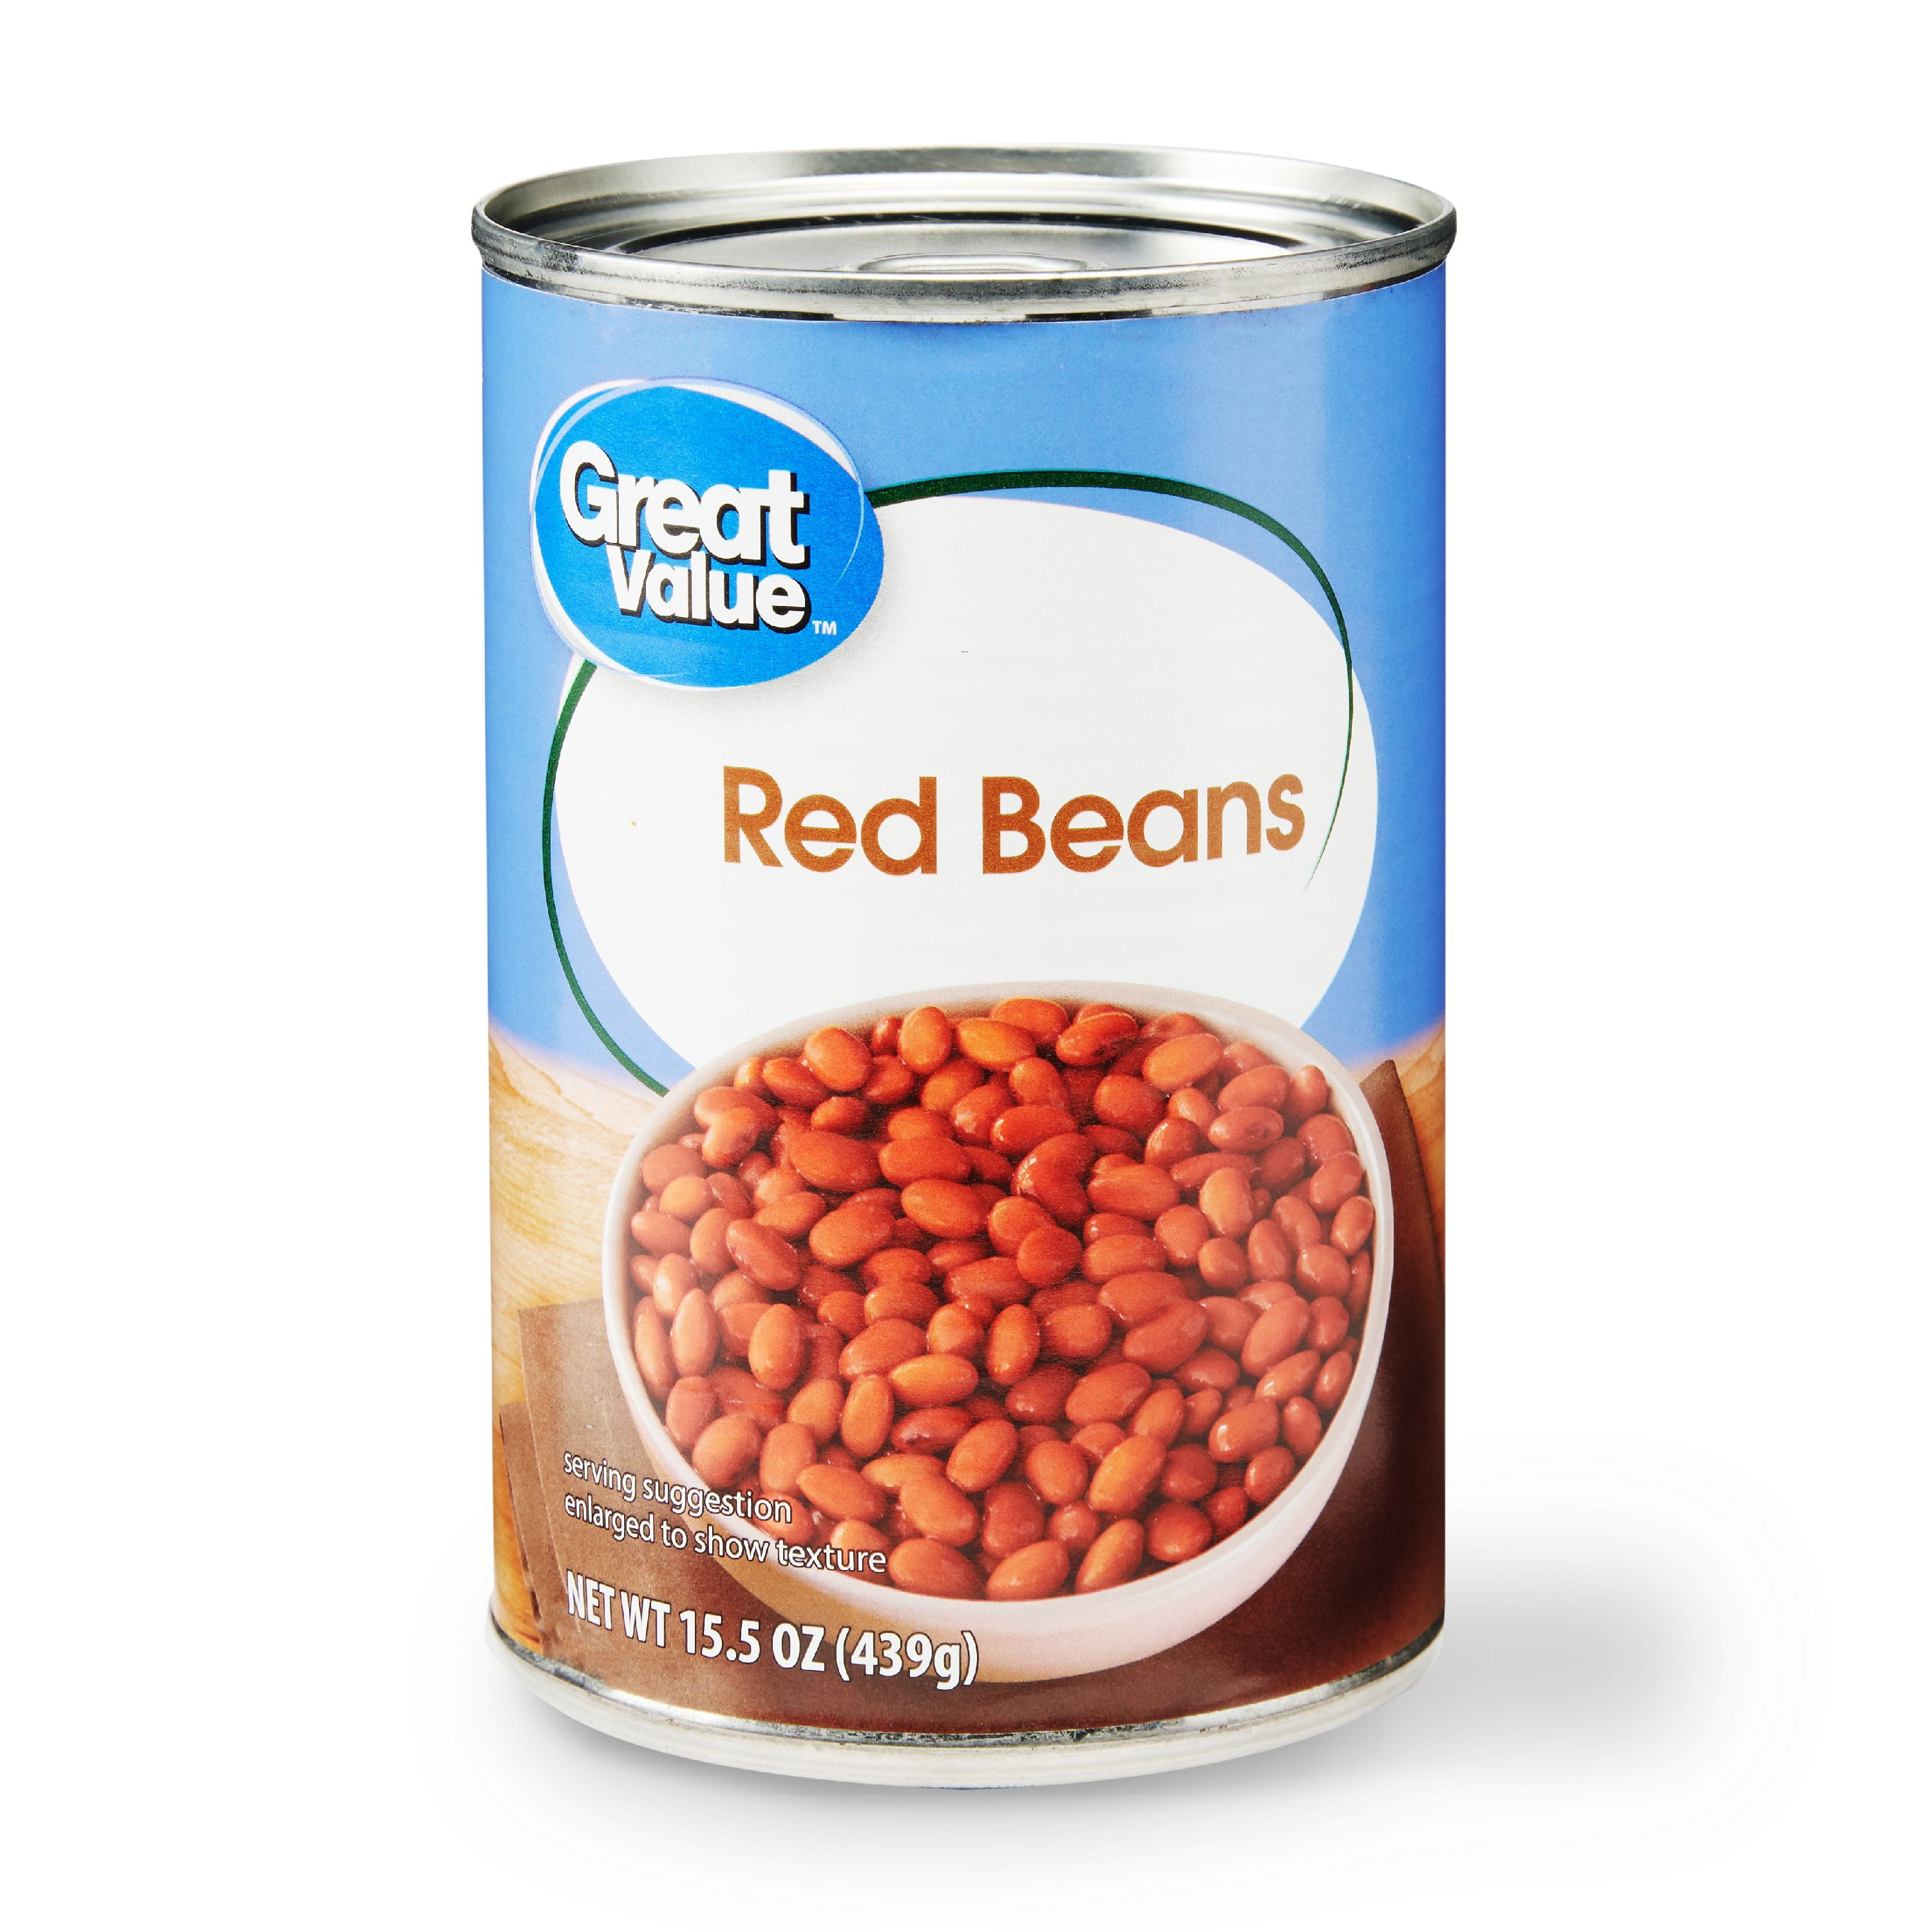 Buy Gran valor Red Bean, 15.5 oz Can Online Chile | Ubuy